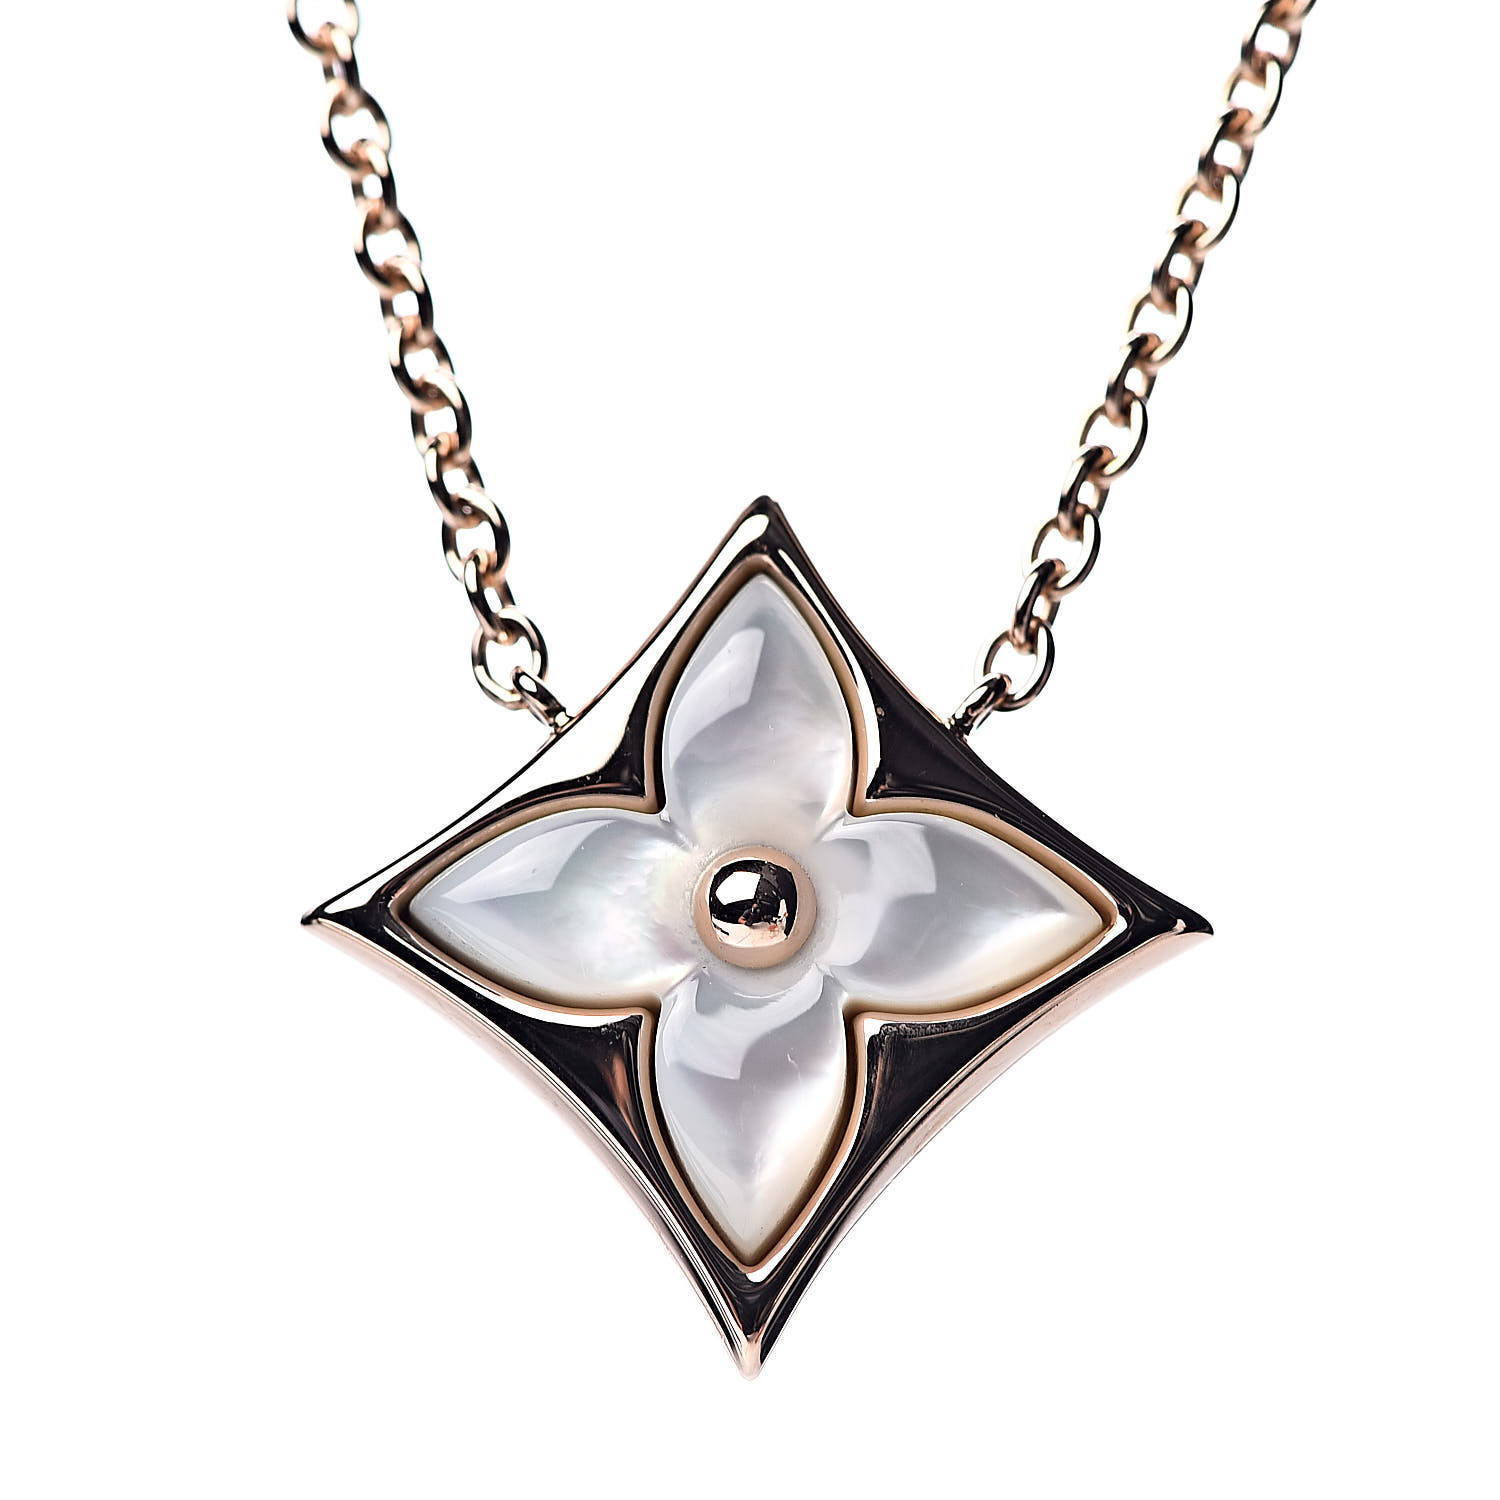 Louis Vuitton Mixed Gold and Diamond B Blossom Pendant Necklace